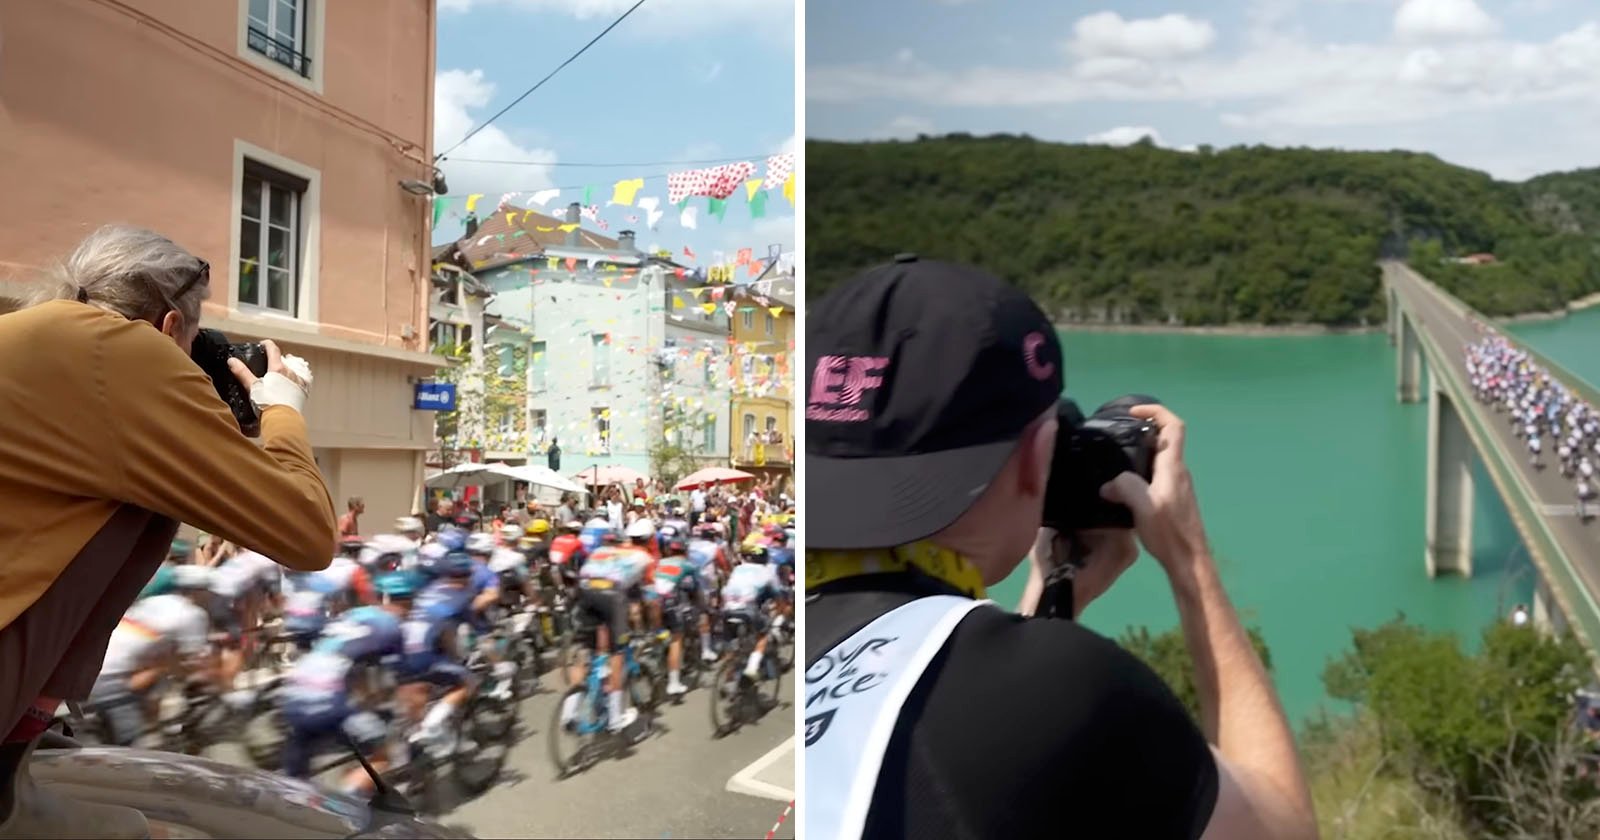 A day in the life of two cycling photographers